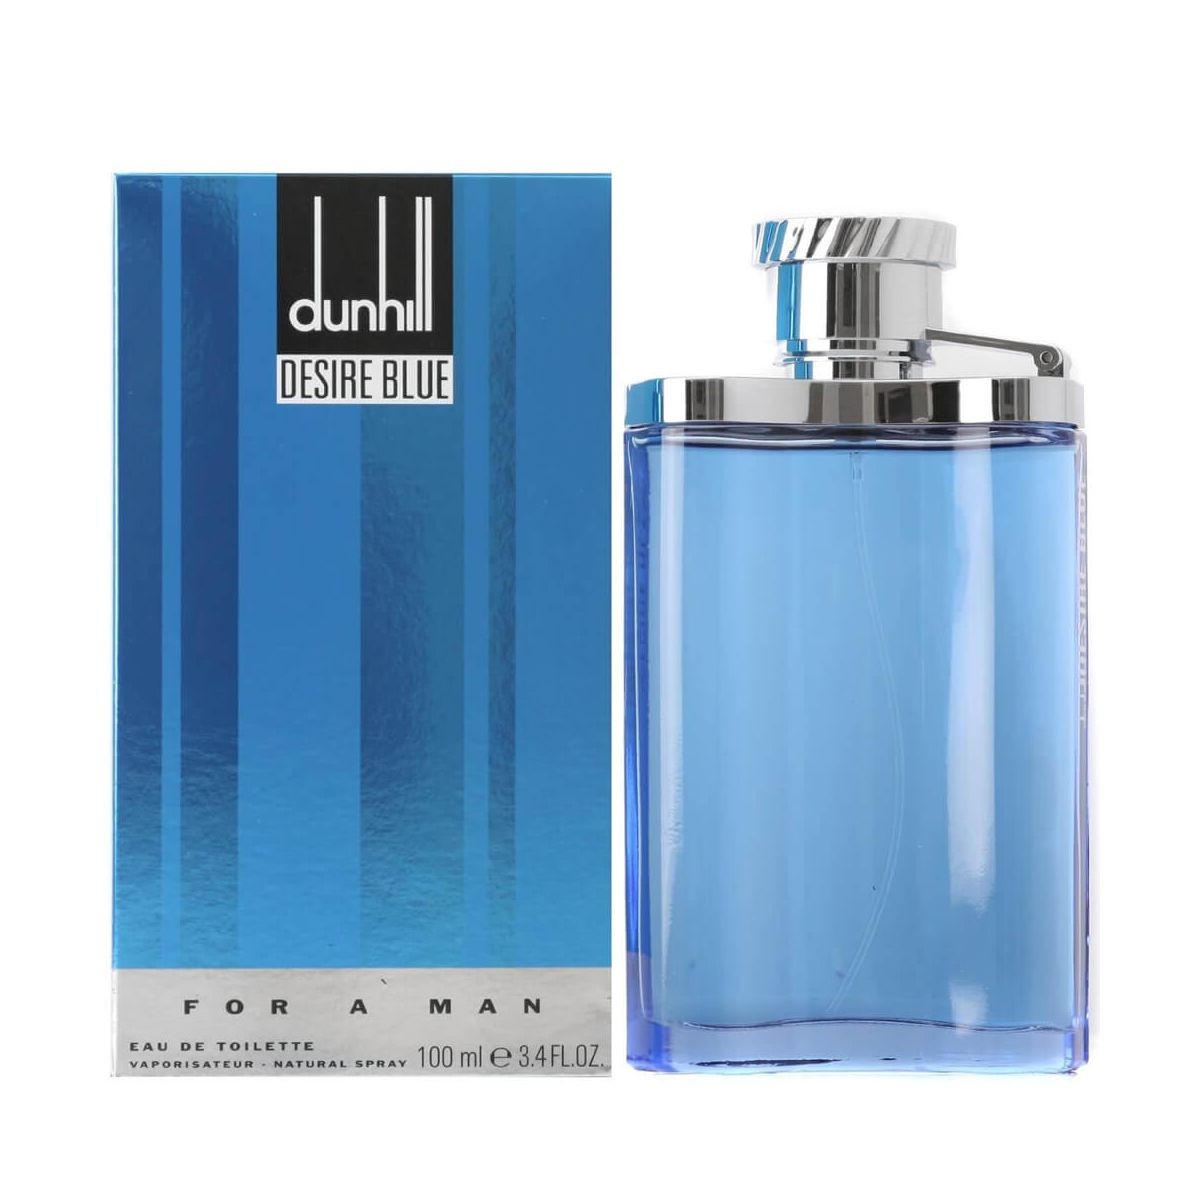 ALFRED DUNHILL DESIRE BLUE